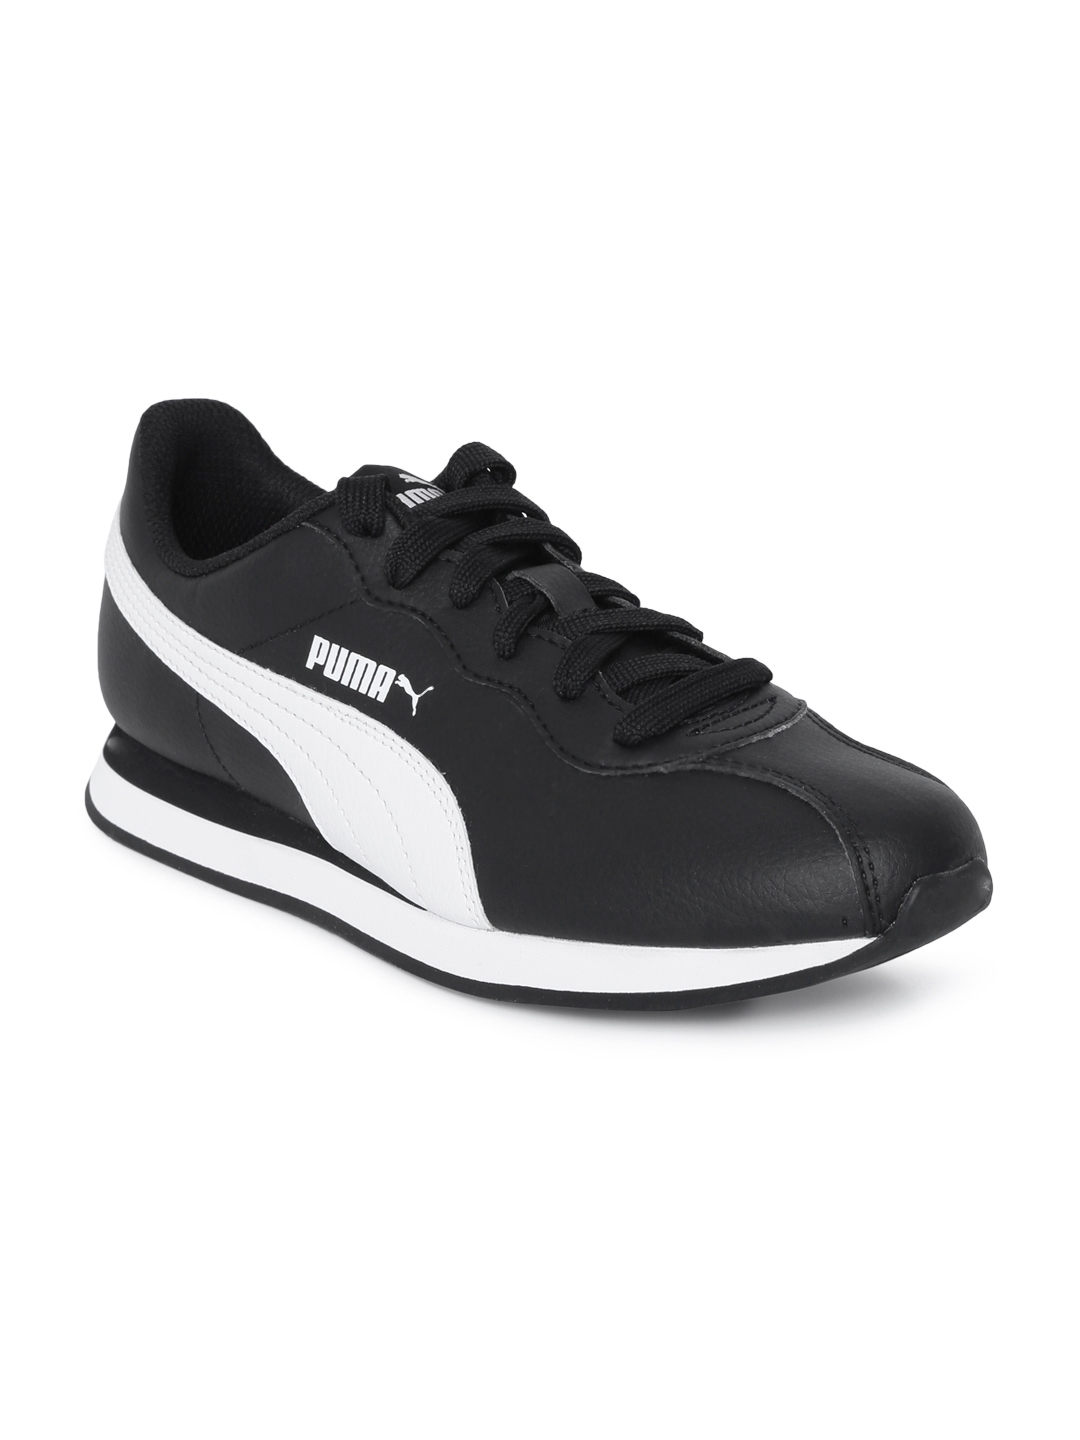 Buy Puma Kids Black Turin II Leather Sneakers - Casual Shoes for Boys ...